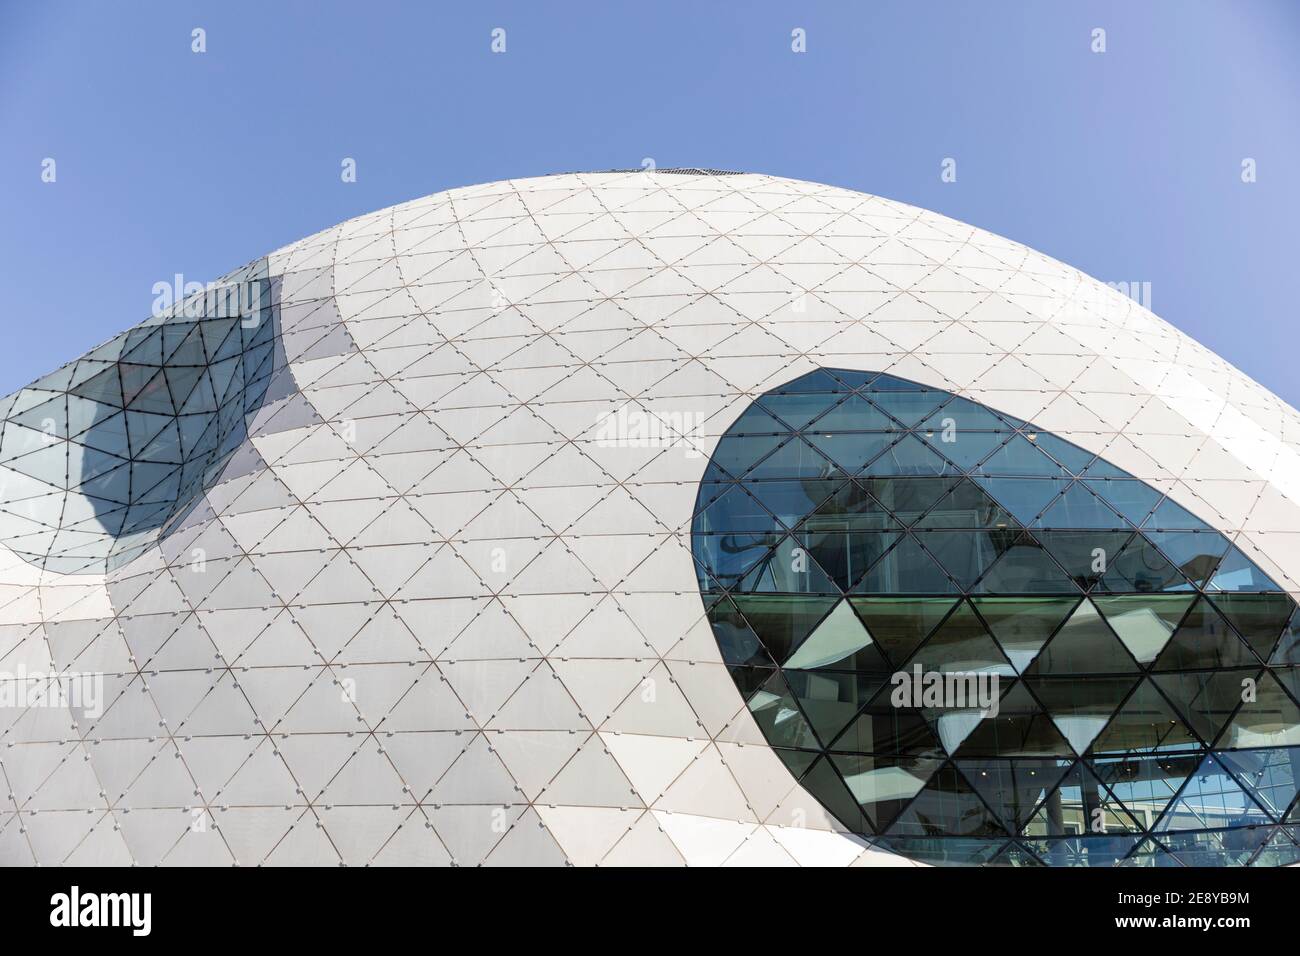 Eindhoven, The Netherlands, April 21st 2020. Exterior of the famous ’Blob’ building designed by Massimiliano Fuksas. Detail shot in the center of the Stock Photo